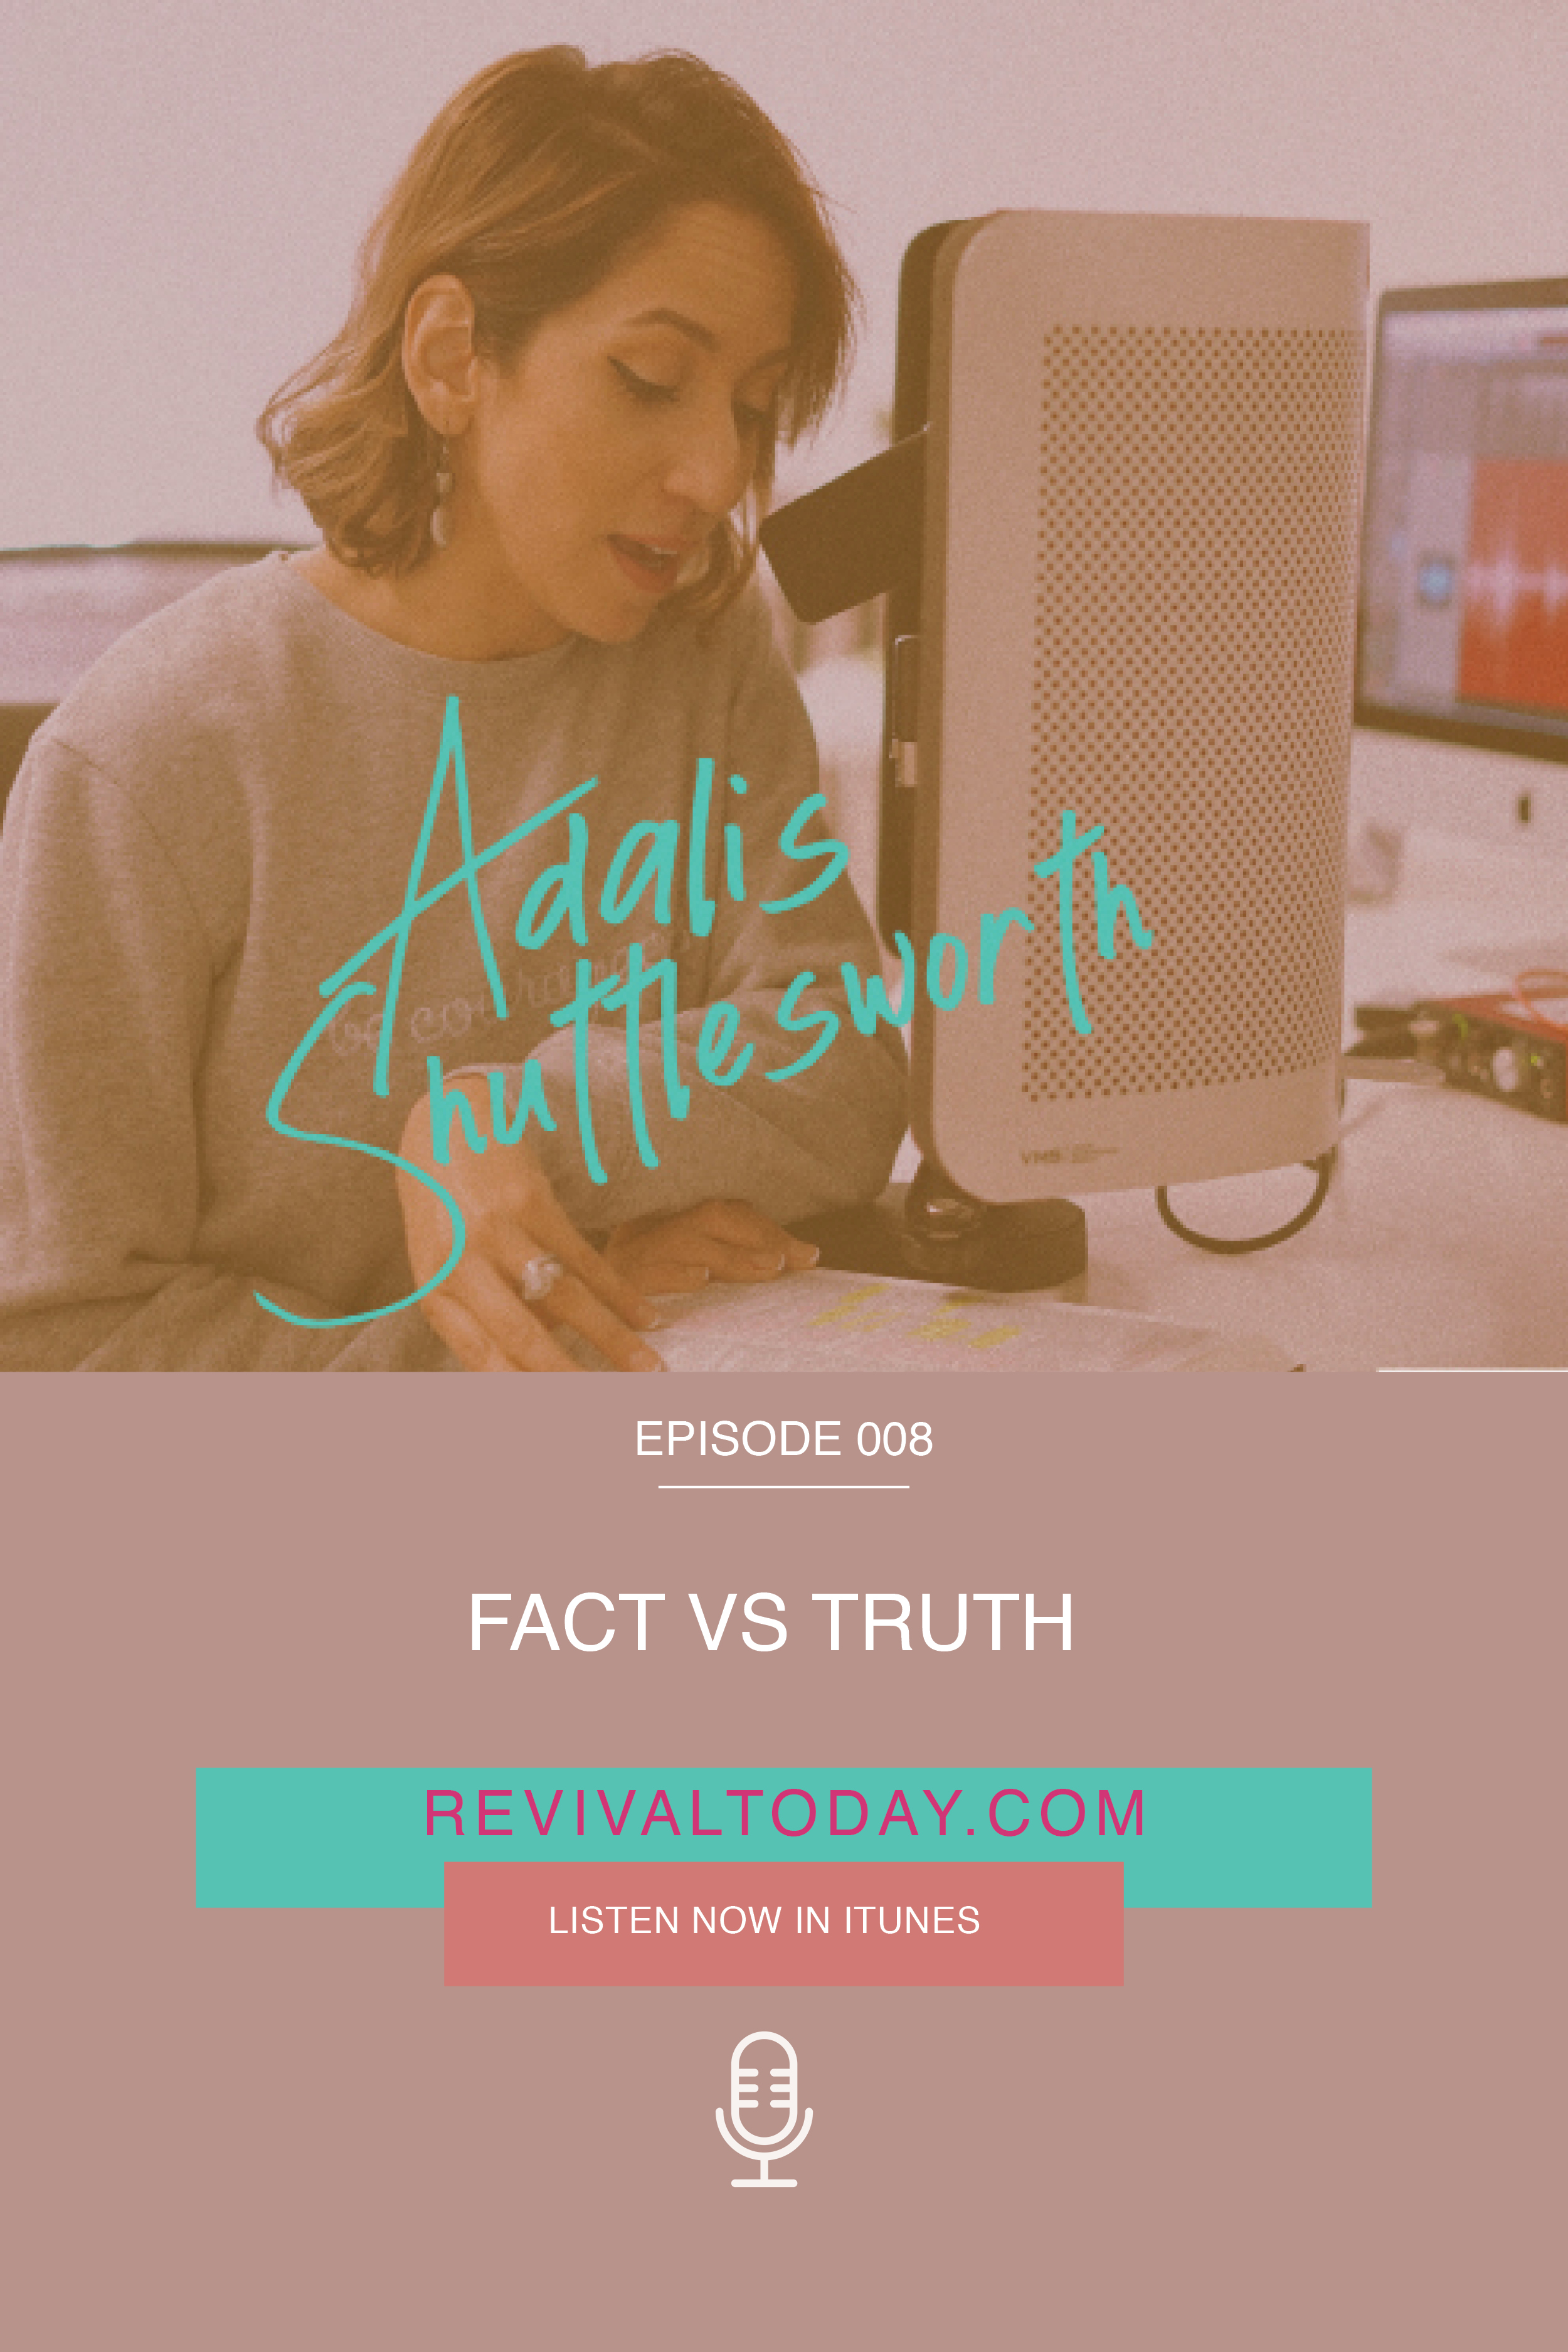 Fact vs Truth, podcast with Adalis Shuttlesworth